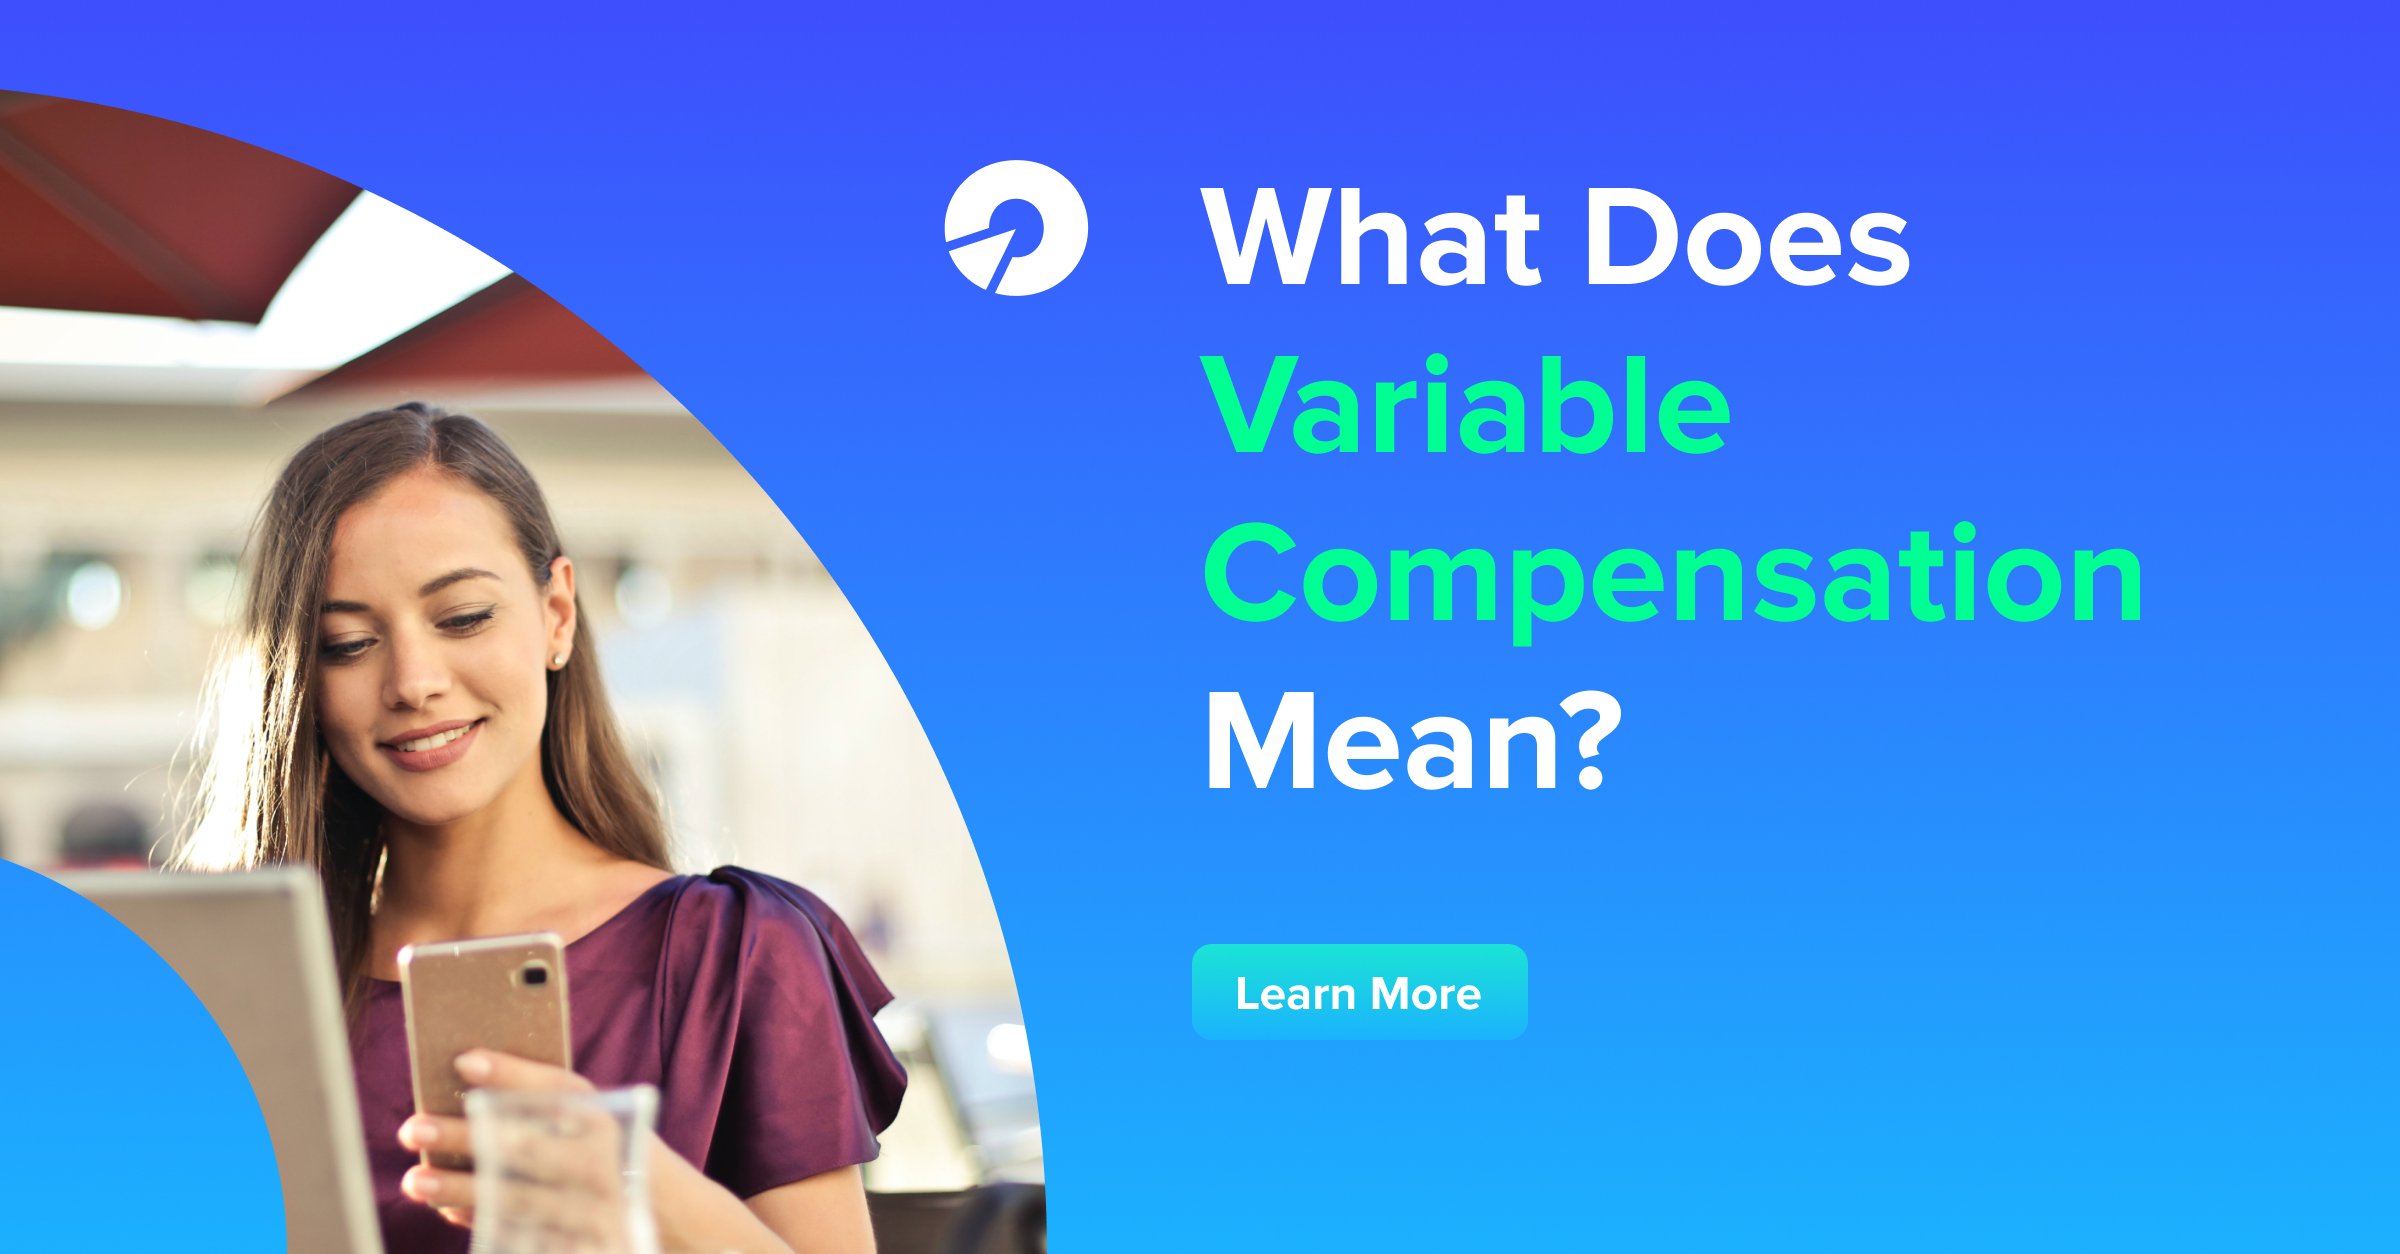 What Does Variable Compensation Mean?